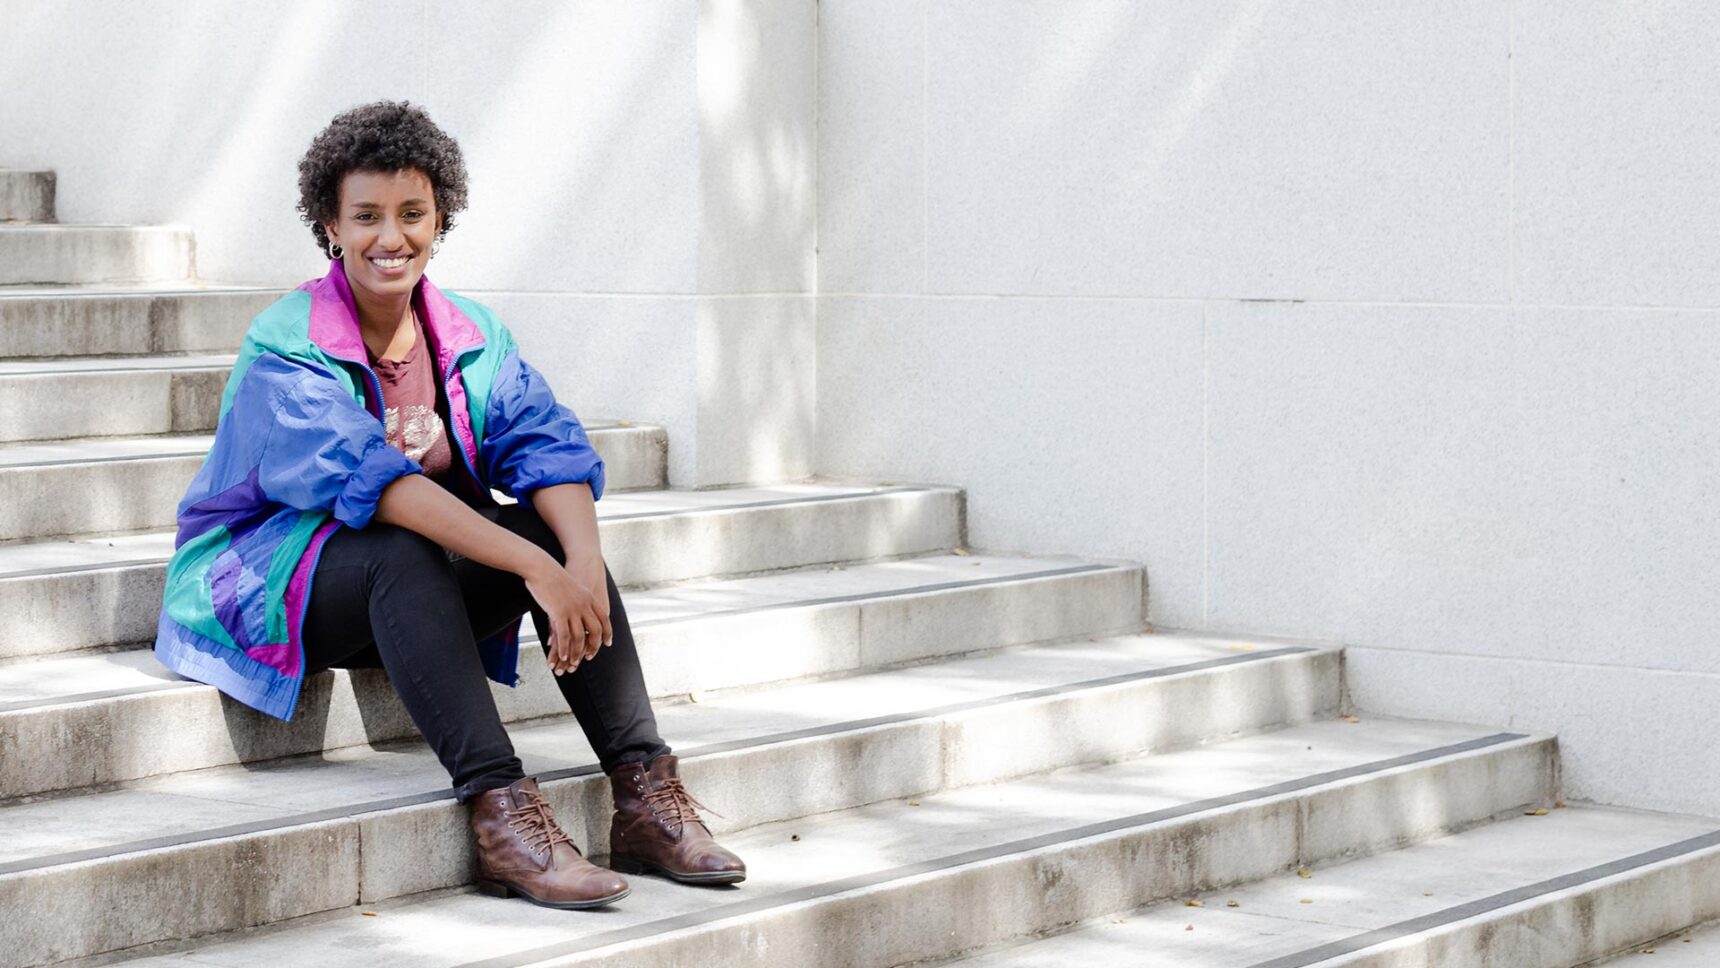 Abebe switched fields from math to computer science in order to learn tools she could apply to social problems like poverty and educational inequality.